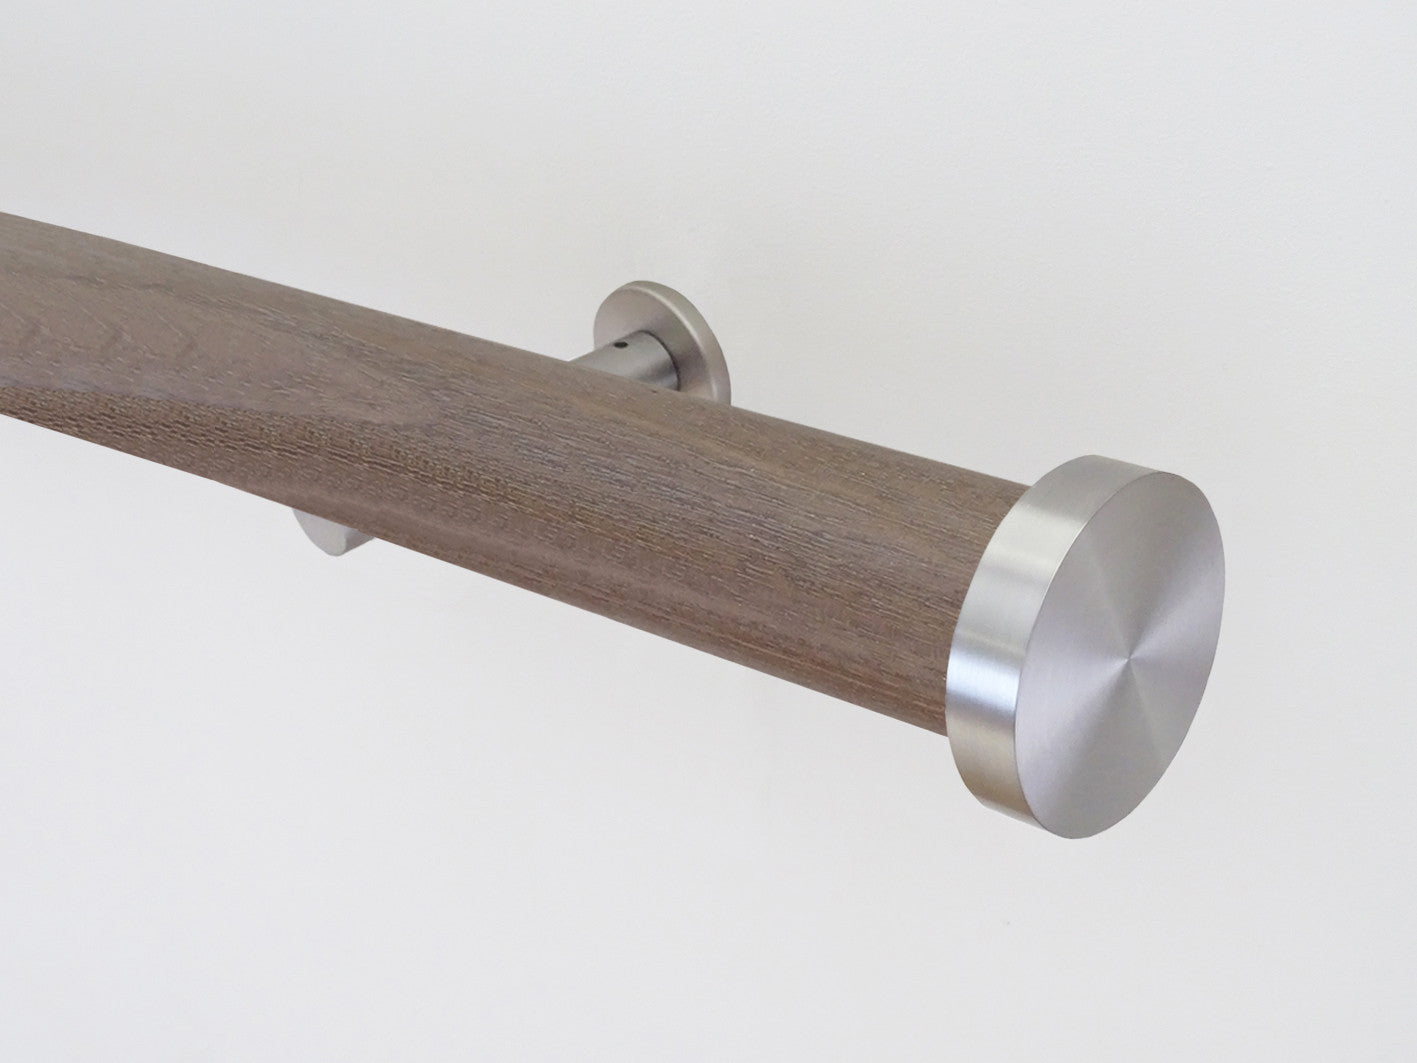 Weathered oak stained wooden tracked curtain pole with acrylic ball finials